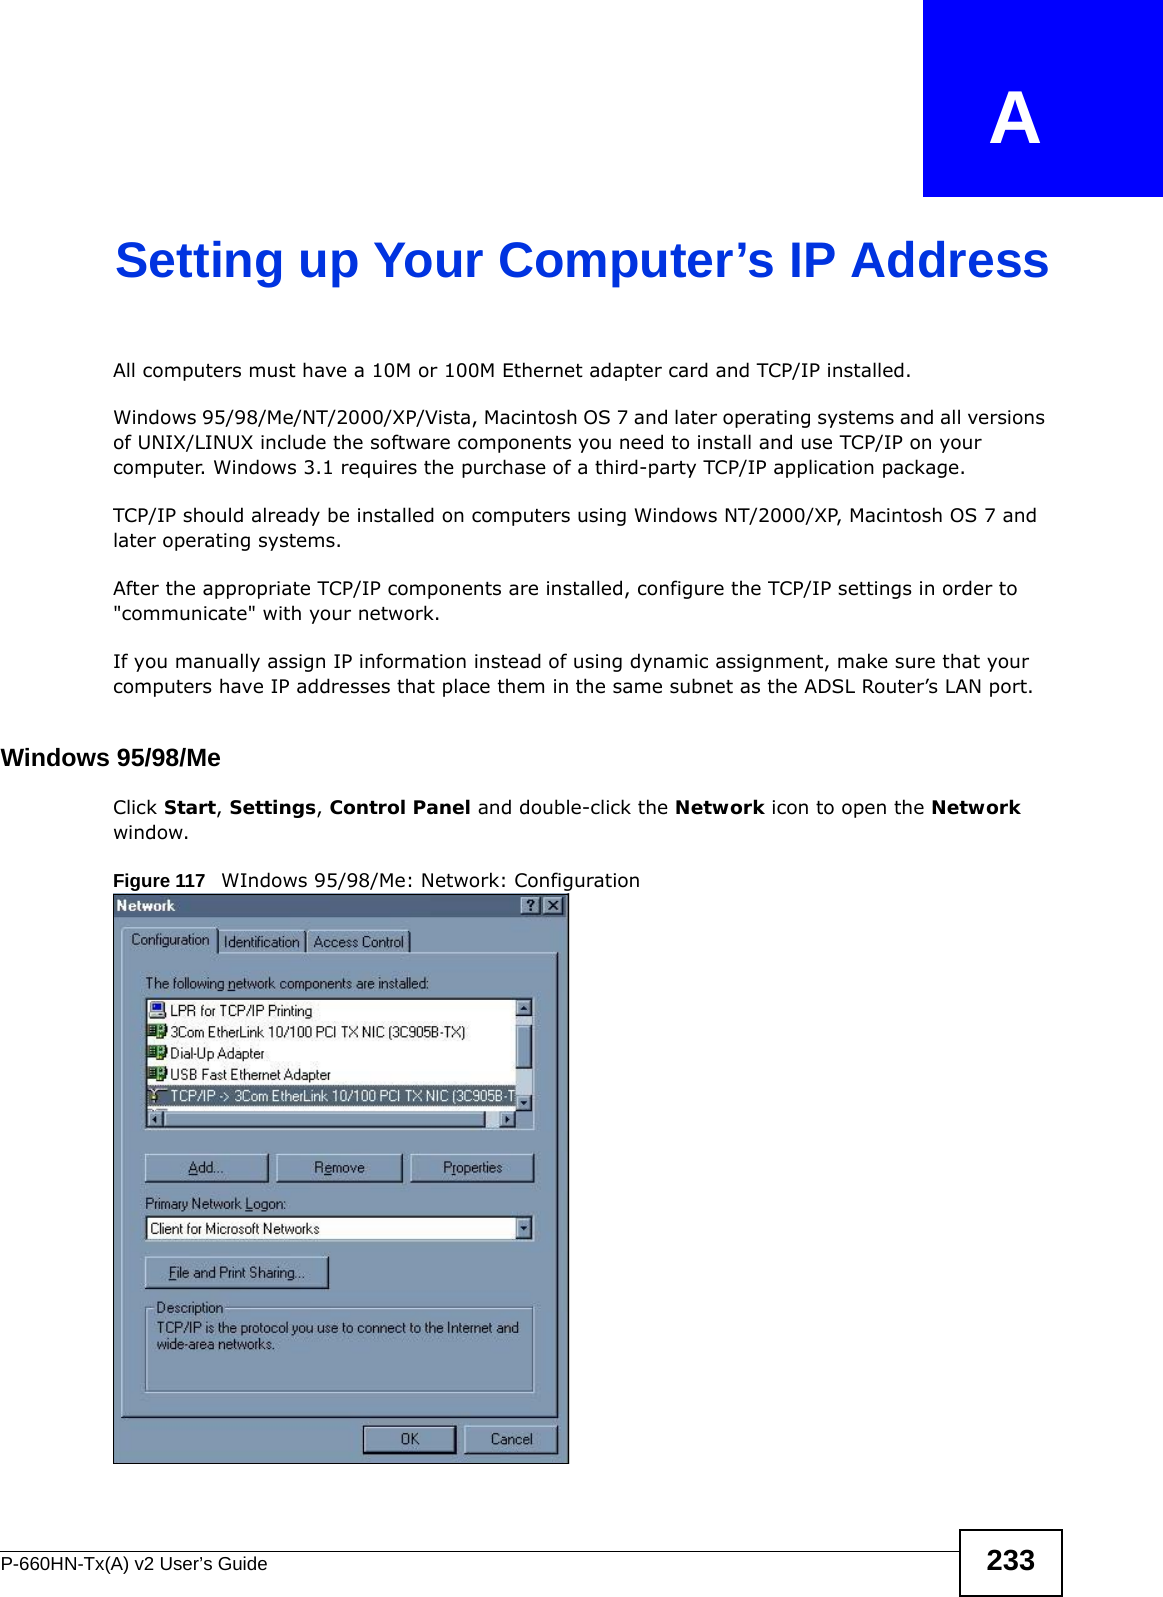 P-660HN-Tx(A) v2 User’s Guide 233APPENDIX   ASetting up Your Computer’s IP AddressAll computers must have a 10M or 100M Ethernet adapter card and TCP/IP installed. Windows 95/98/Me/NT/2000/XP/Vista, Macintosh OS 7 and later operating systems and all versions of UNIX/LINUX include the software components you need to install and use TCP/IP on your computer. Windows 3.1 requires the purchase of a third-party TCP/IP application package.TCP/IP should already be installed on computers using Windows NT/2000/XP, Macintosh OS 7 and later operating systems.After the appropriate TCP/IP components are installed, configure the TCP/IP settings in order to &quot;communicate&quot; with your network. If you manually assign IP information instead of using dynamic assignment, make sure that your computers have IP addresses that place them in the same subnet as the ADSL Router’s LAN port.Windows 95/98/MeClick Start, Settings, Control Panel and double-click the Network icon to open the Network window.Figure 117   WIndows 95/98/Me: Network: Configuration